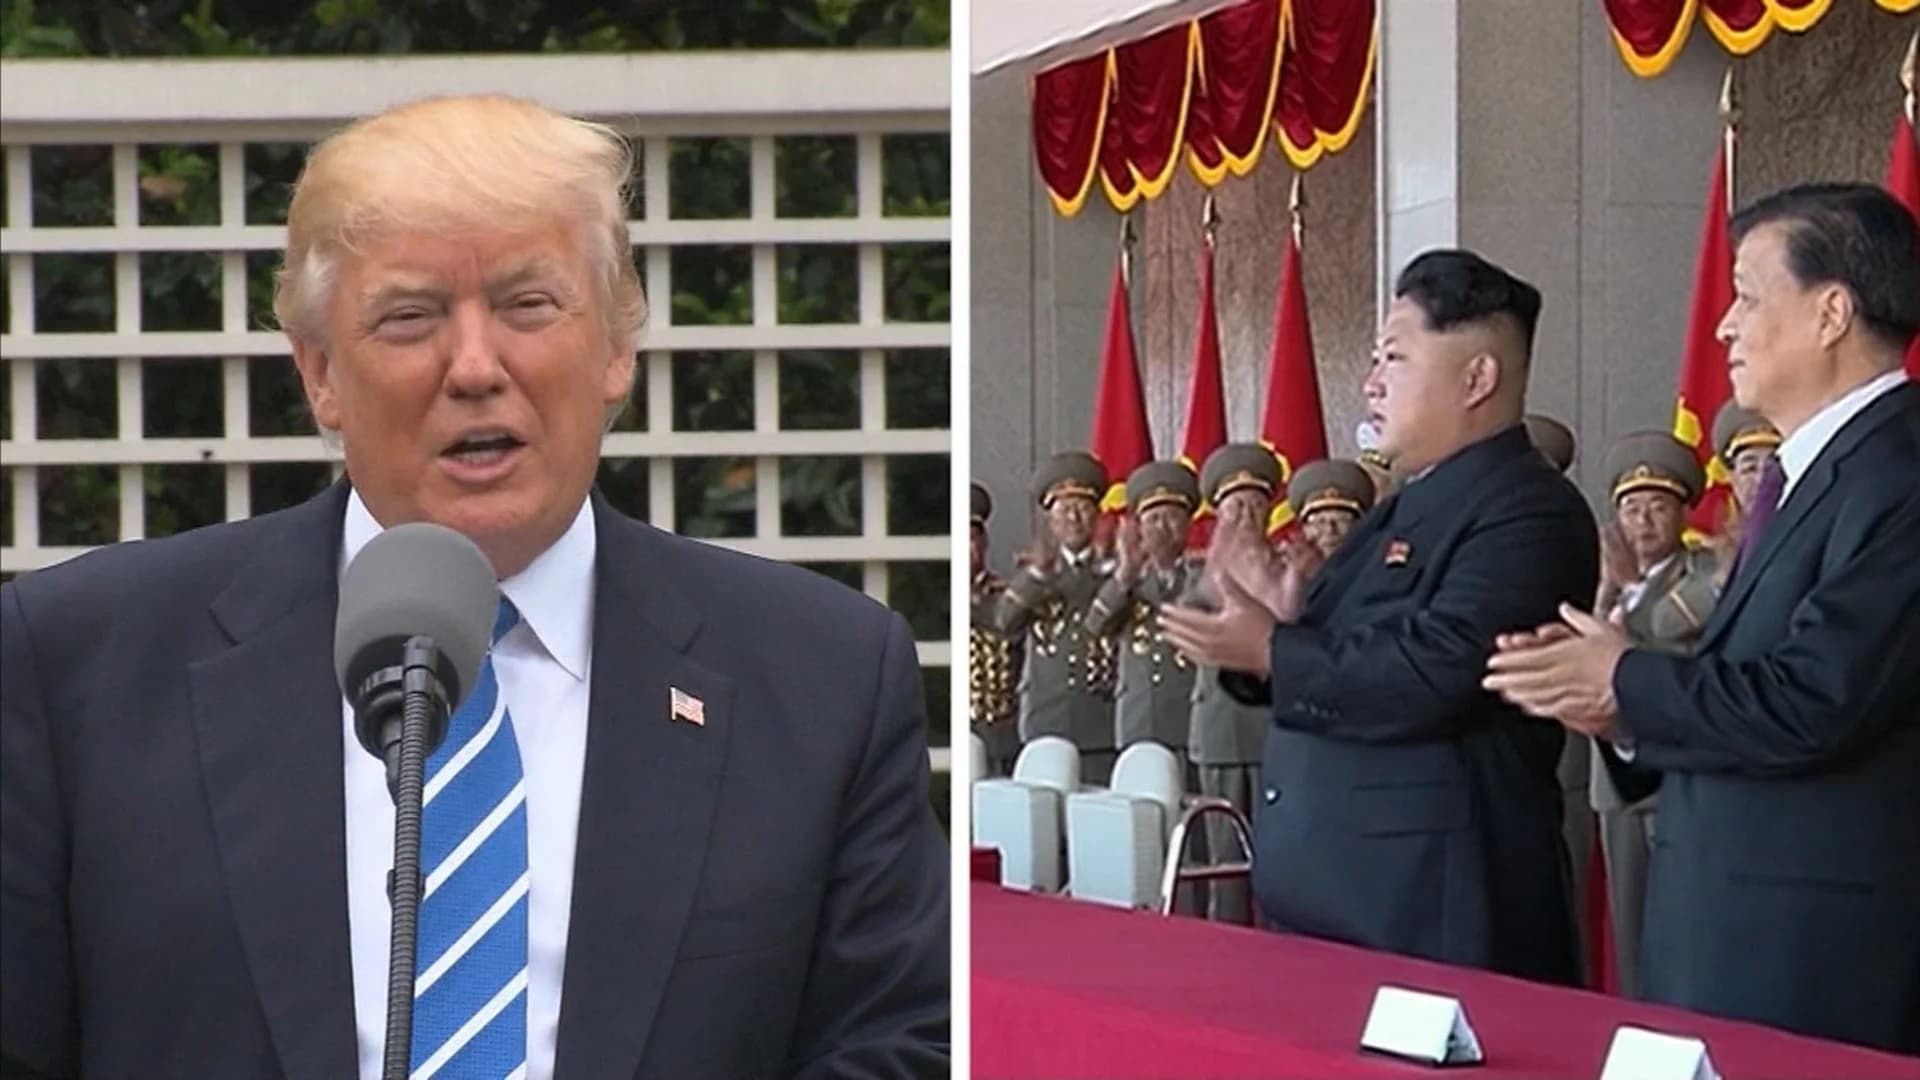 President Trump: Would be "honored to meet with Kim Jong Un if circumstances were right."